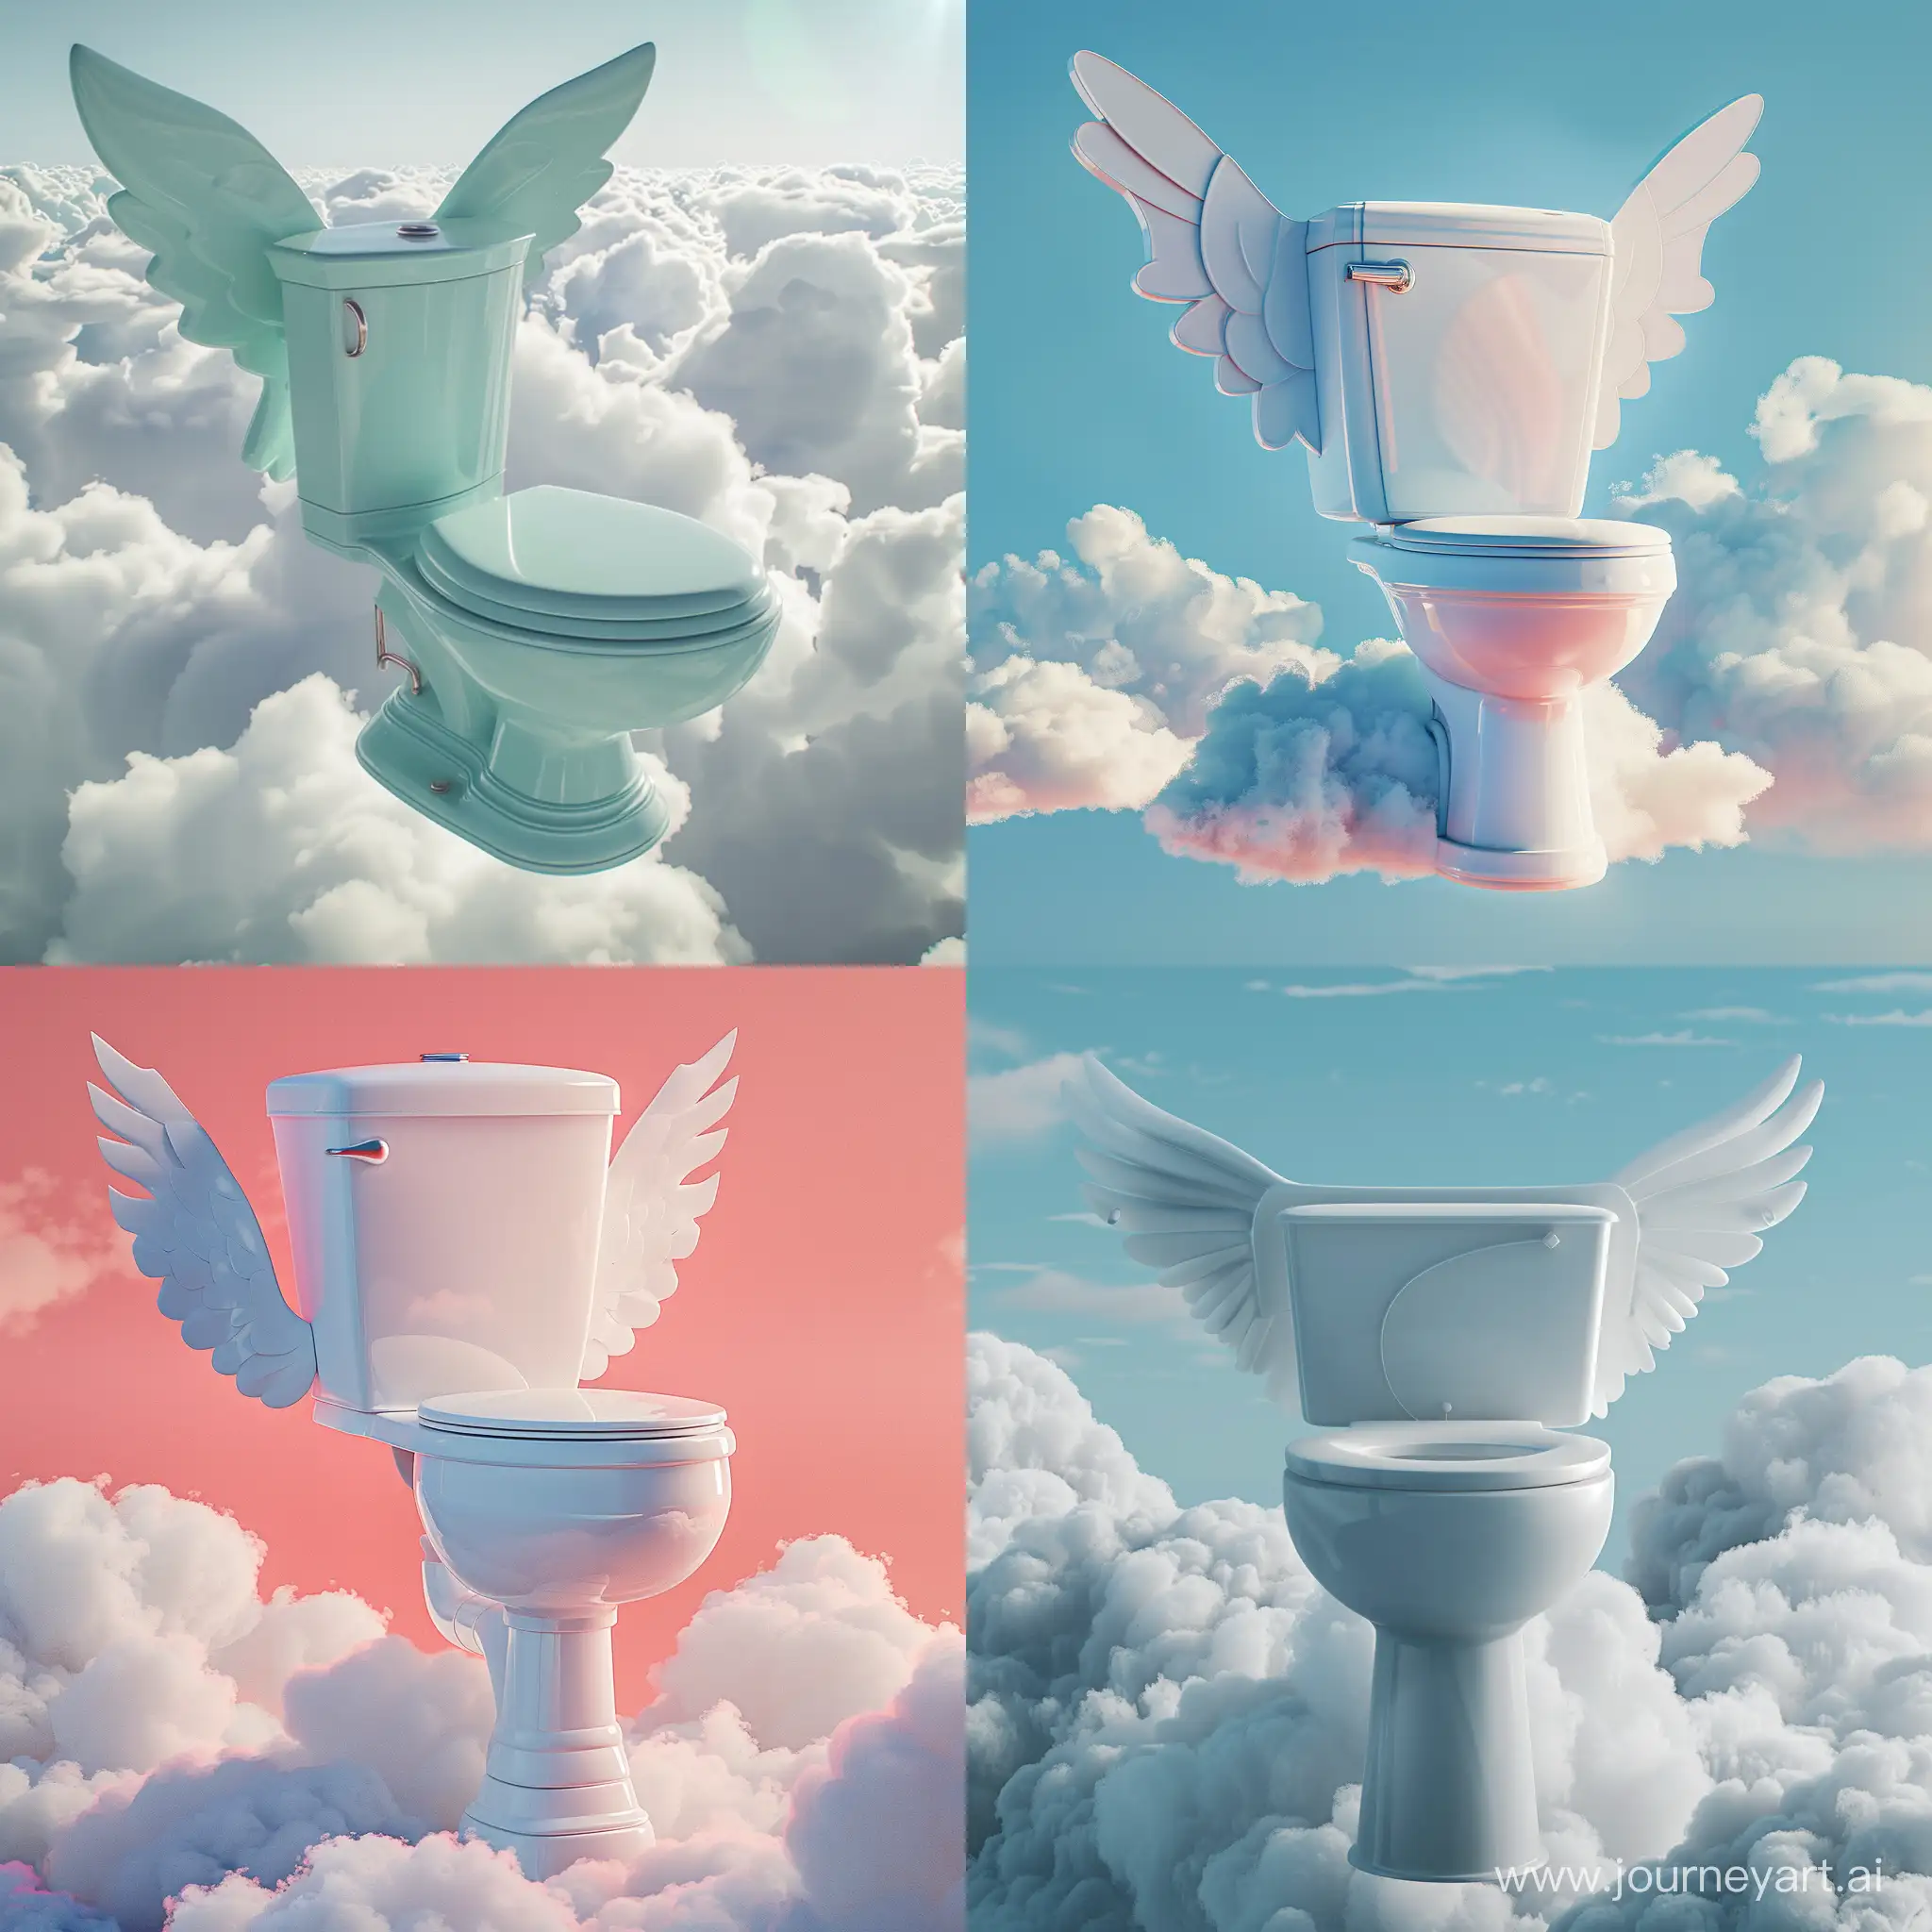 Giant-Flying-Toilet-Soaring-Through-Clouds